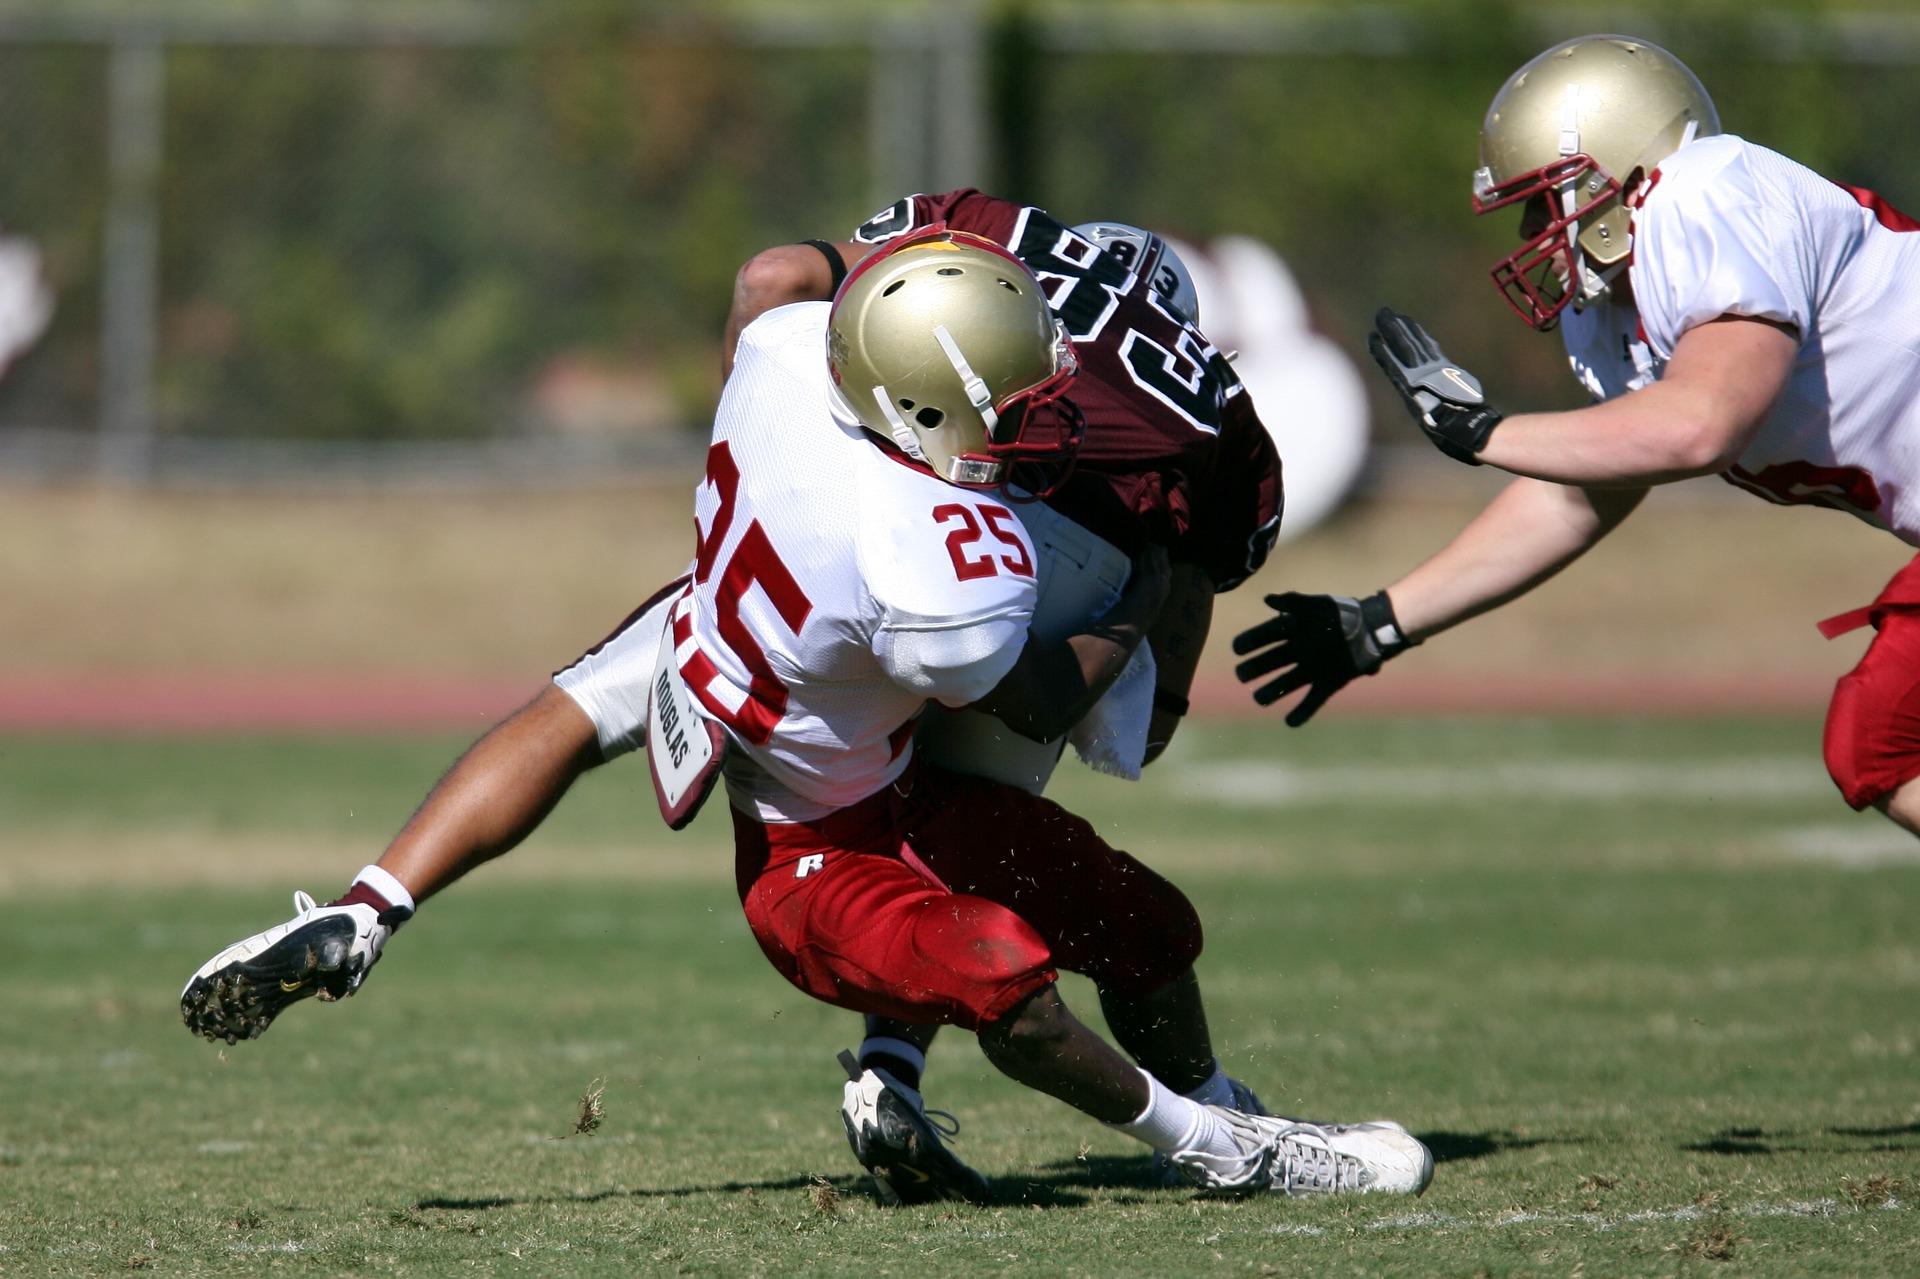 Researchers found that actions, such as a tackle in football, came across as more intentional when viewed in slow motion than at regular speed. (Pixabay) 